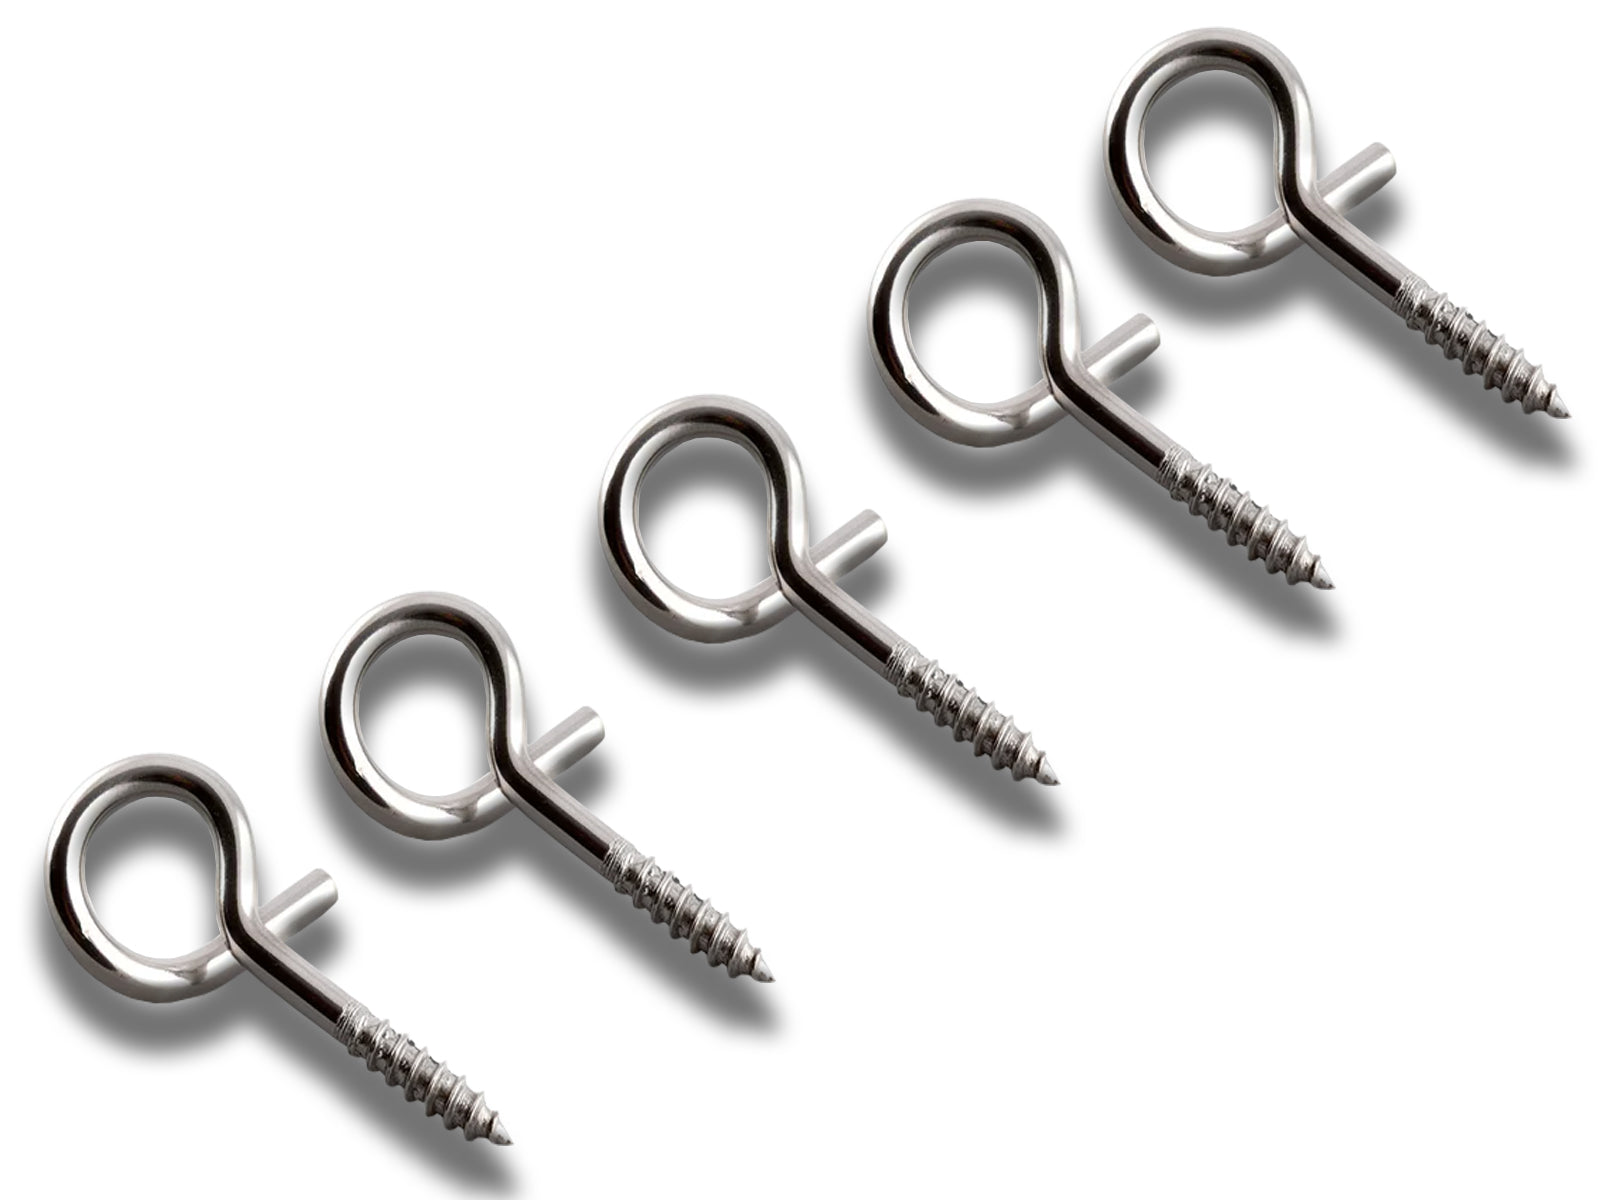 Image-of-the-five-open-loop-screws-on-the-white-background